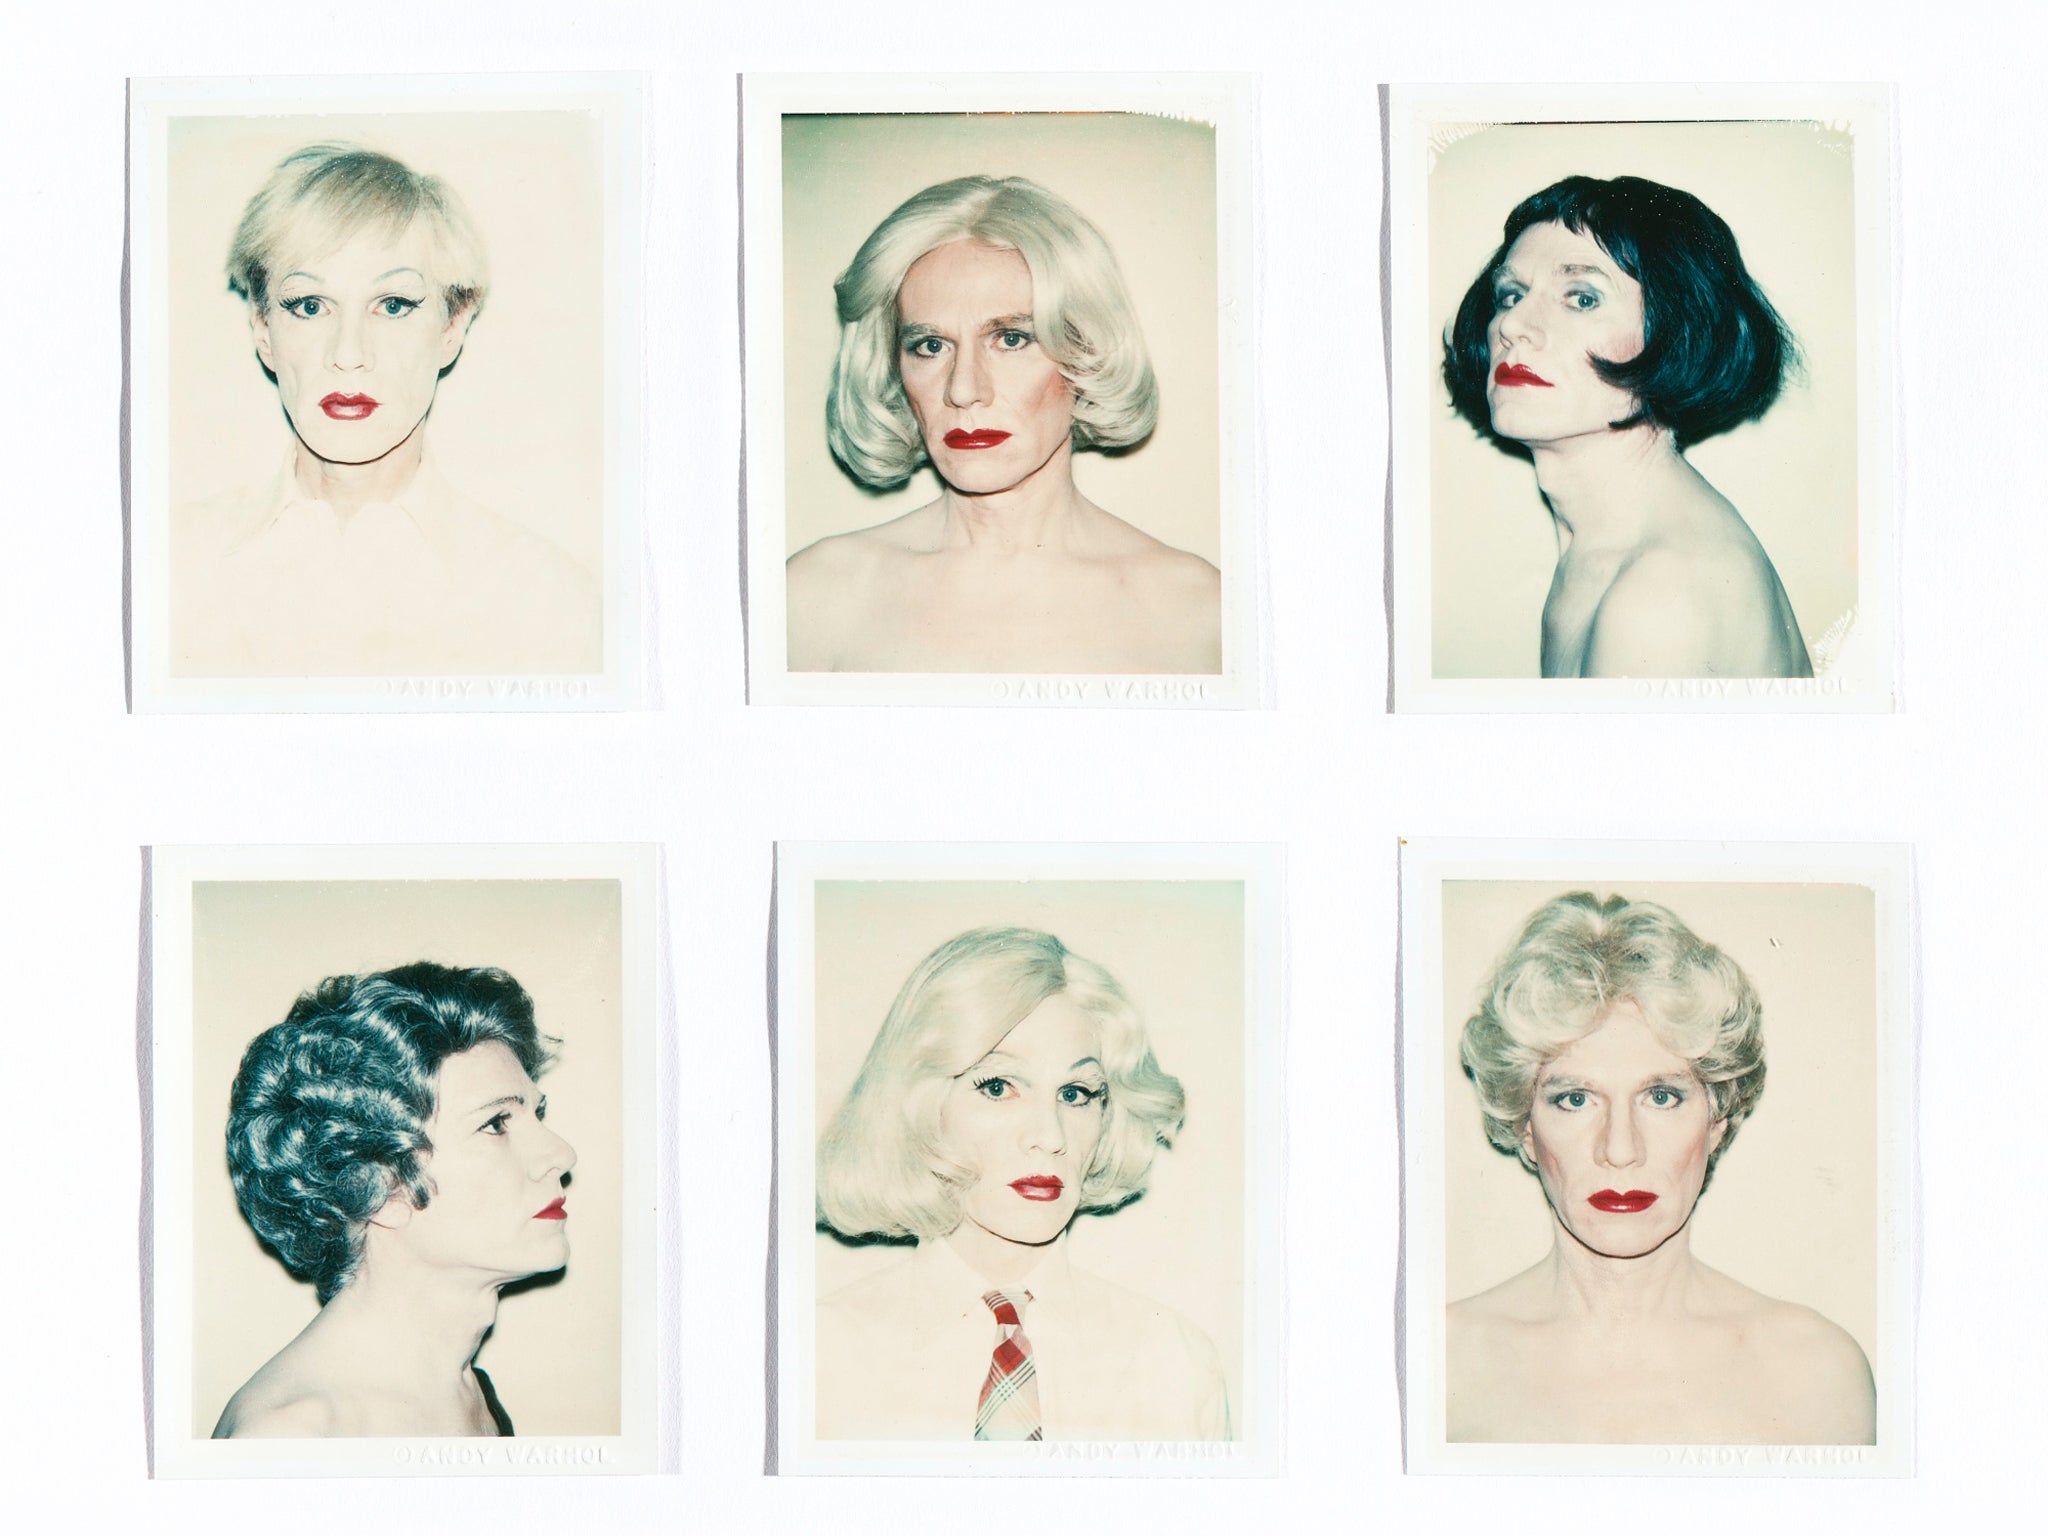 Andy Warhol Polaroid selfies go up for sale on eBay | The ...